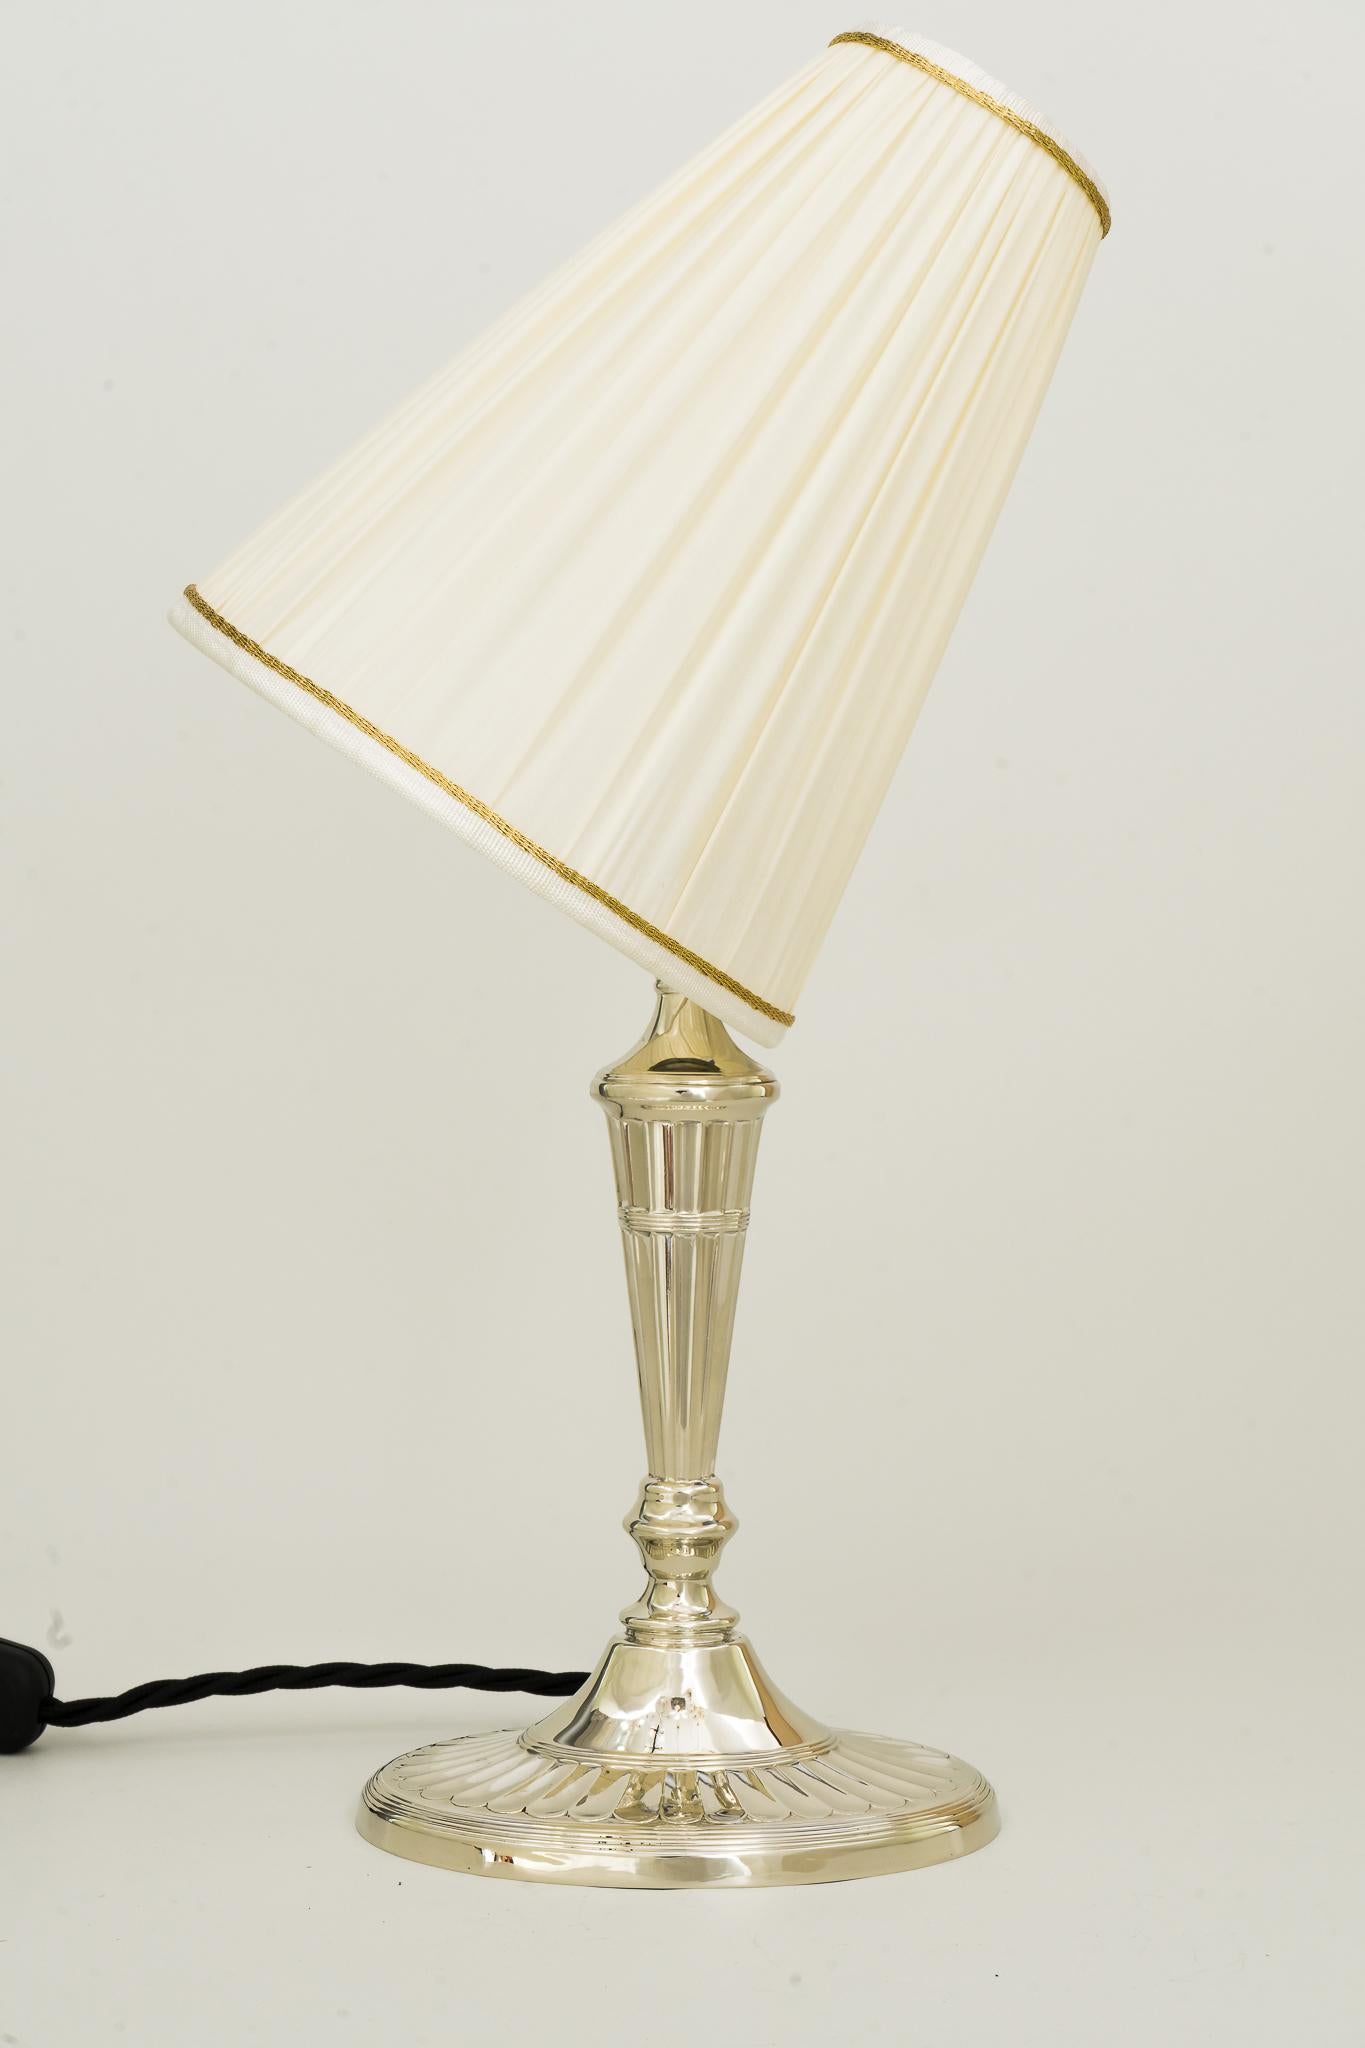 Lacquered Art Deco Oval Table Lamp Alpaca with Fabric Shade, circa 1920s